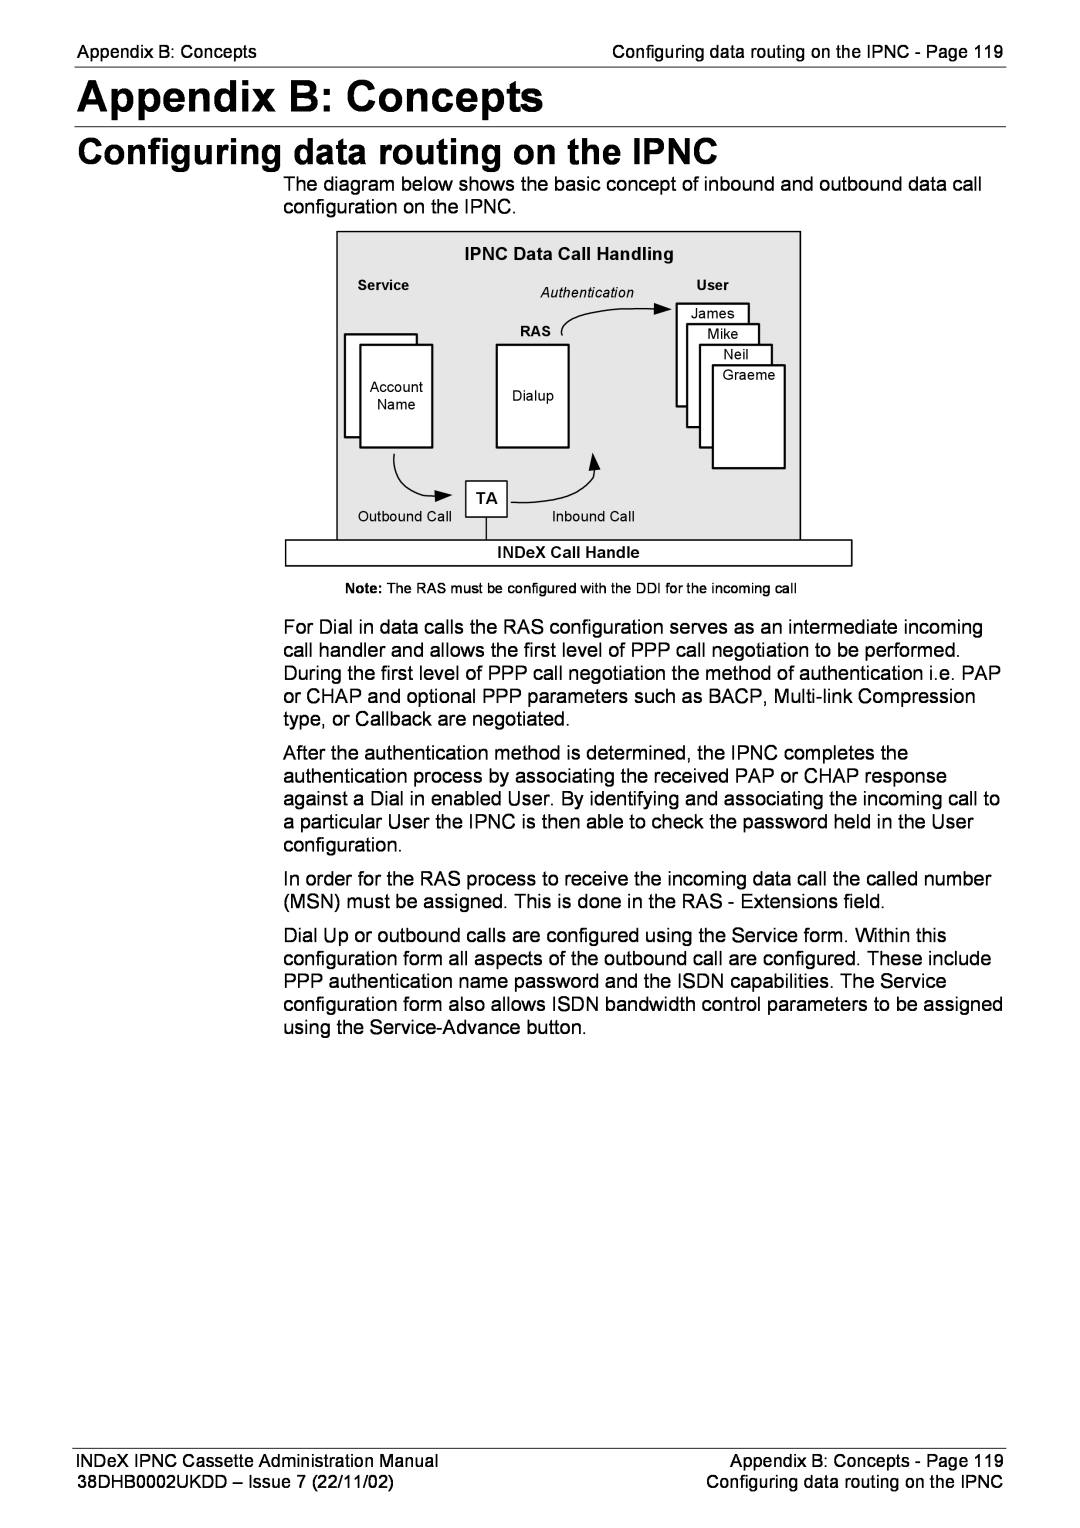 Avaya 38DHB0002UKDD manual Appendix B Concepts, Configuring data routing on the IPNC 